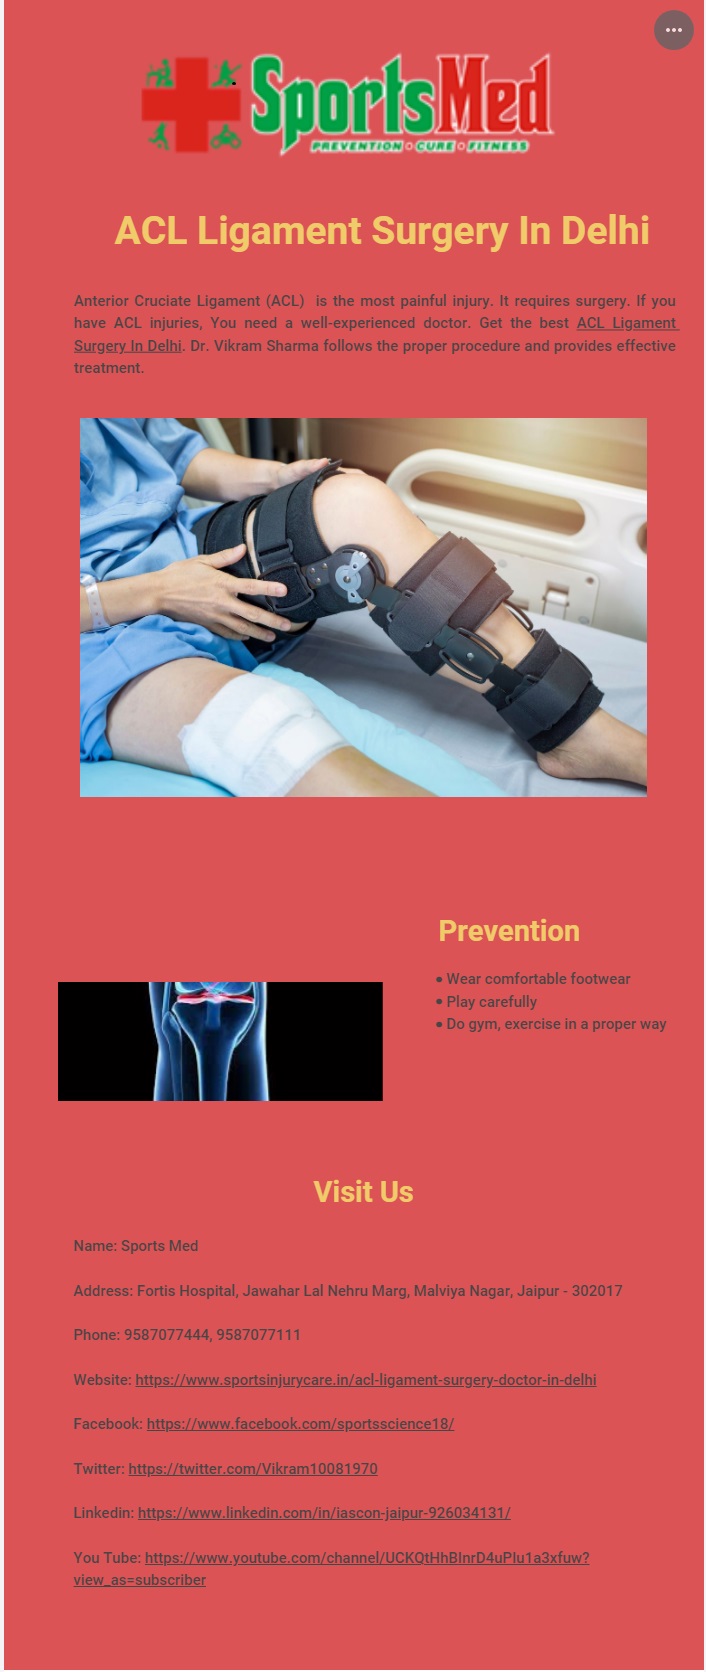 ACL Ligament Surgery In Delhi